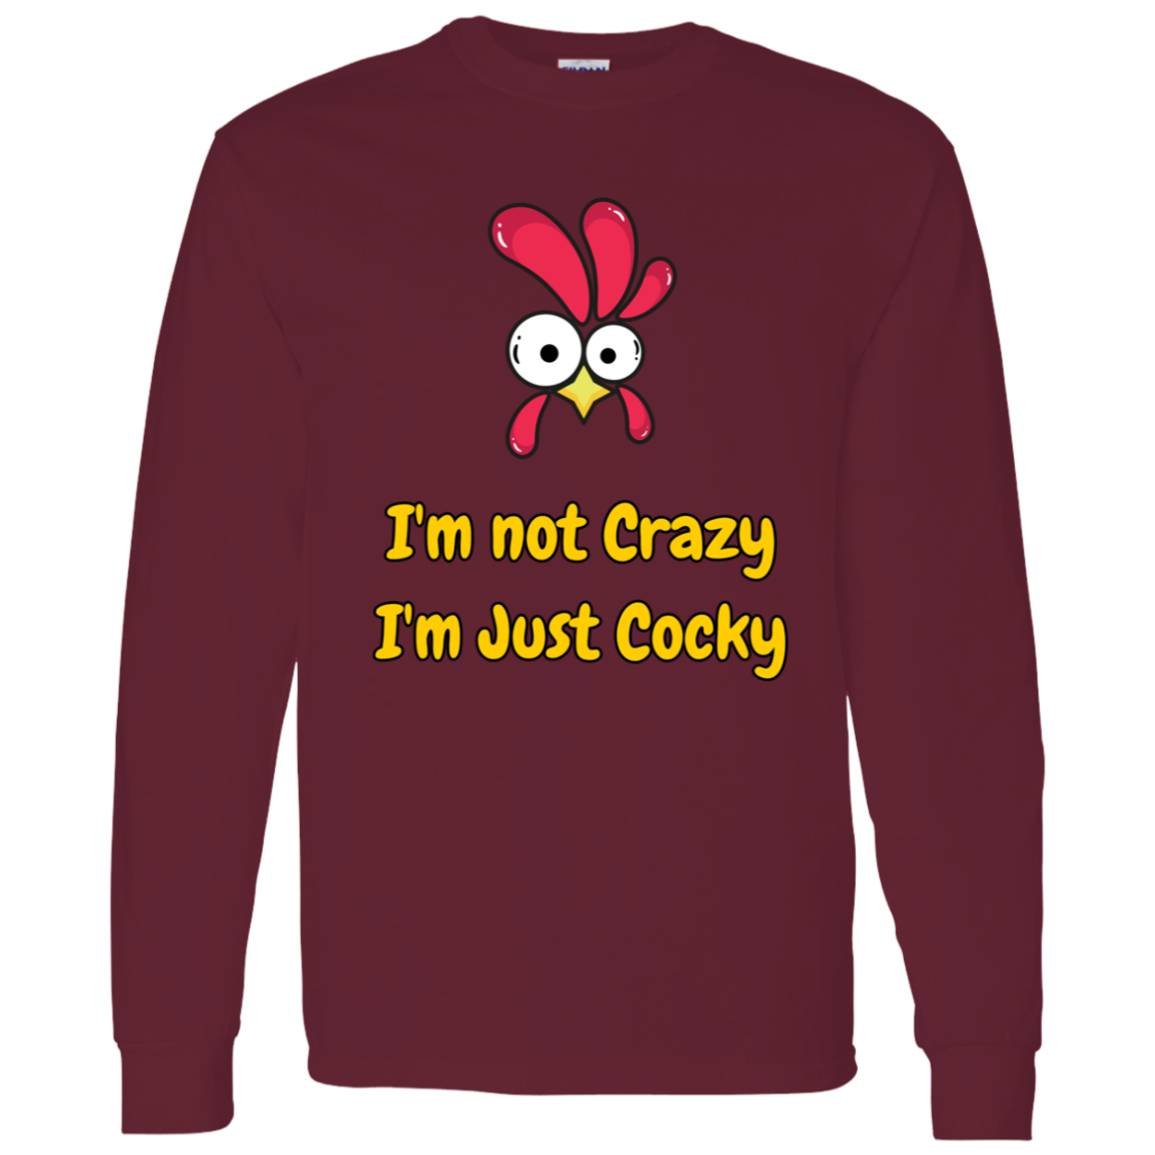 I'm Not Crazy, I'm Just Cocky - Men's Long-Sleeve T-Shirt